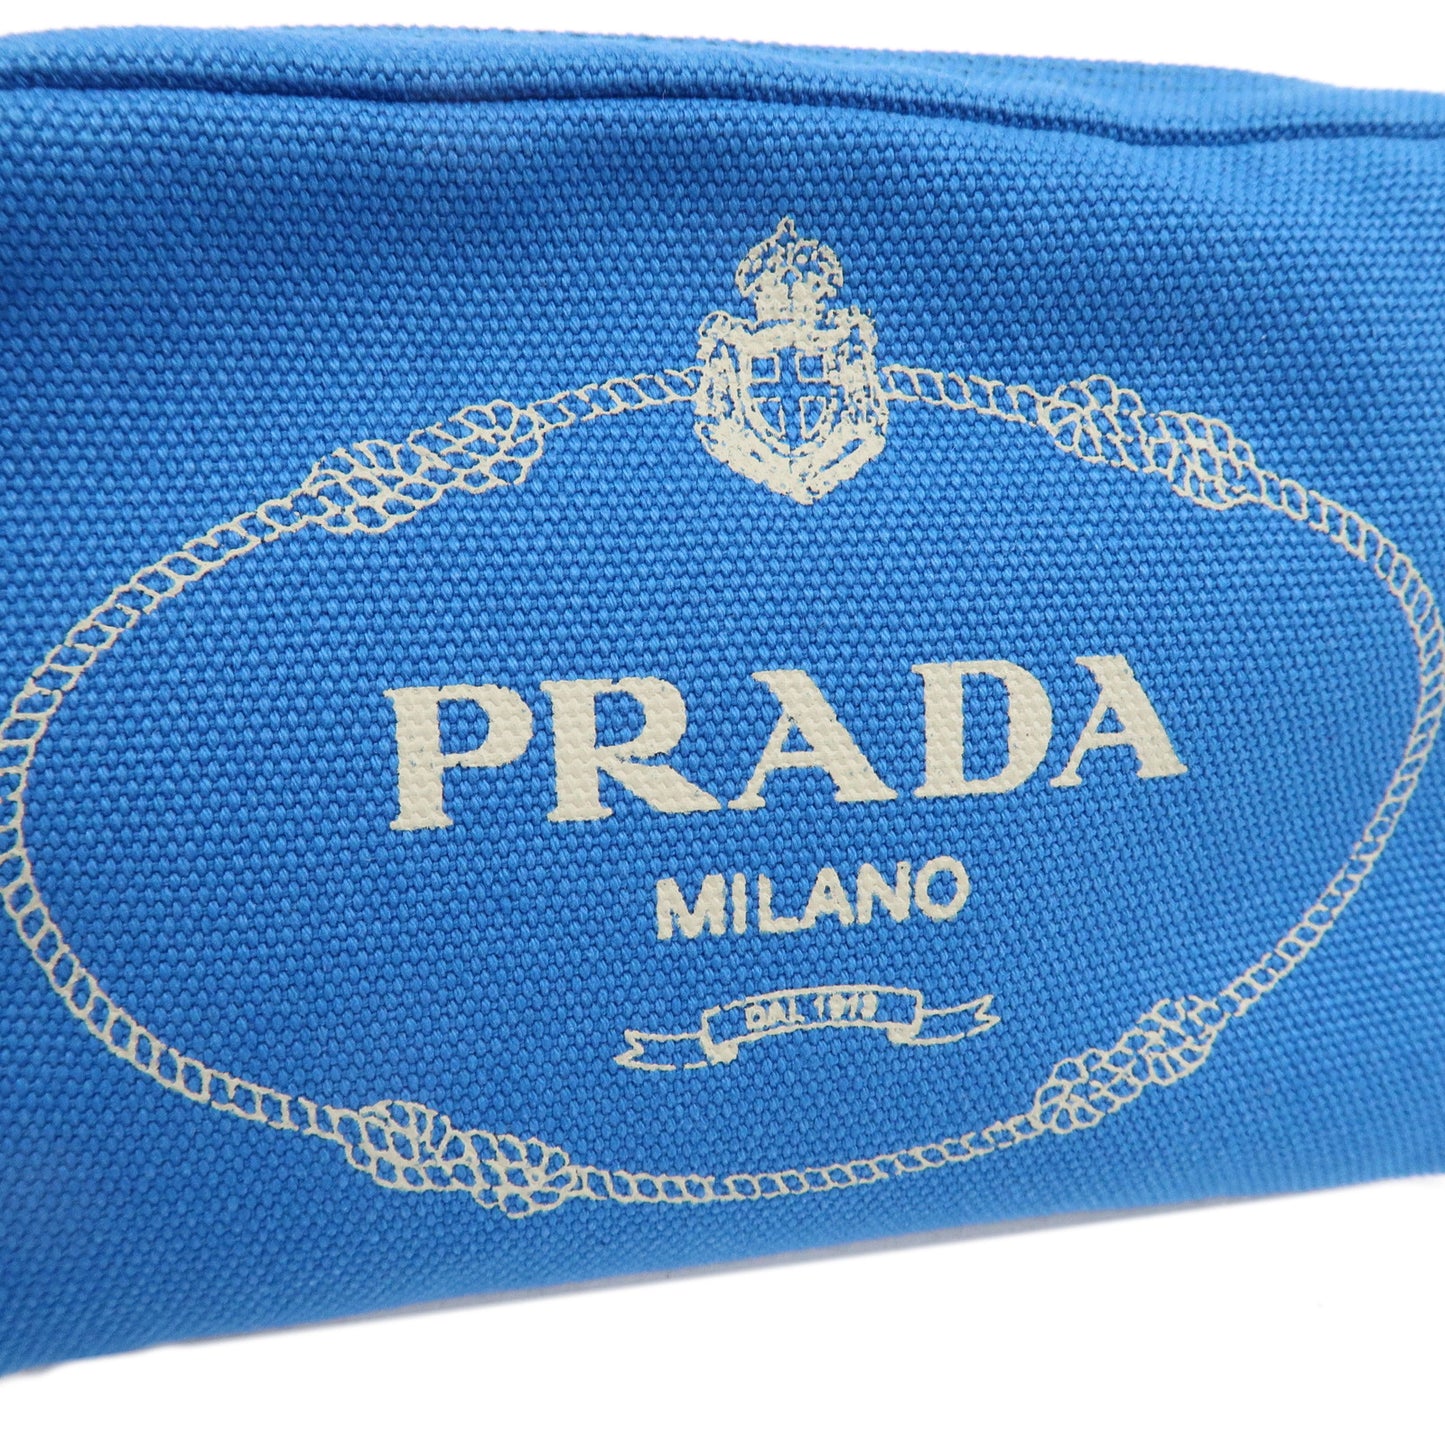 PRADA Canapa Canvas Leather Cosmetic Pouch Blue 1NA693